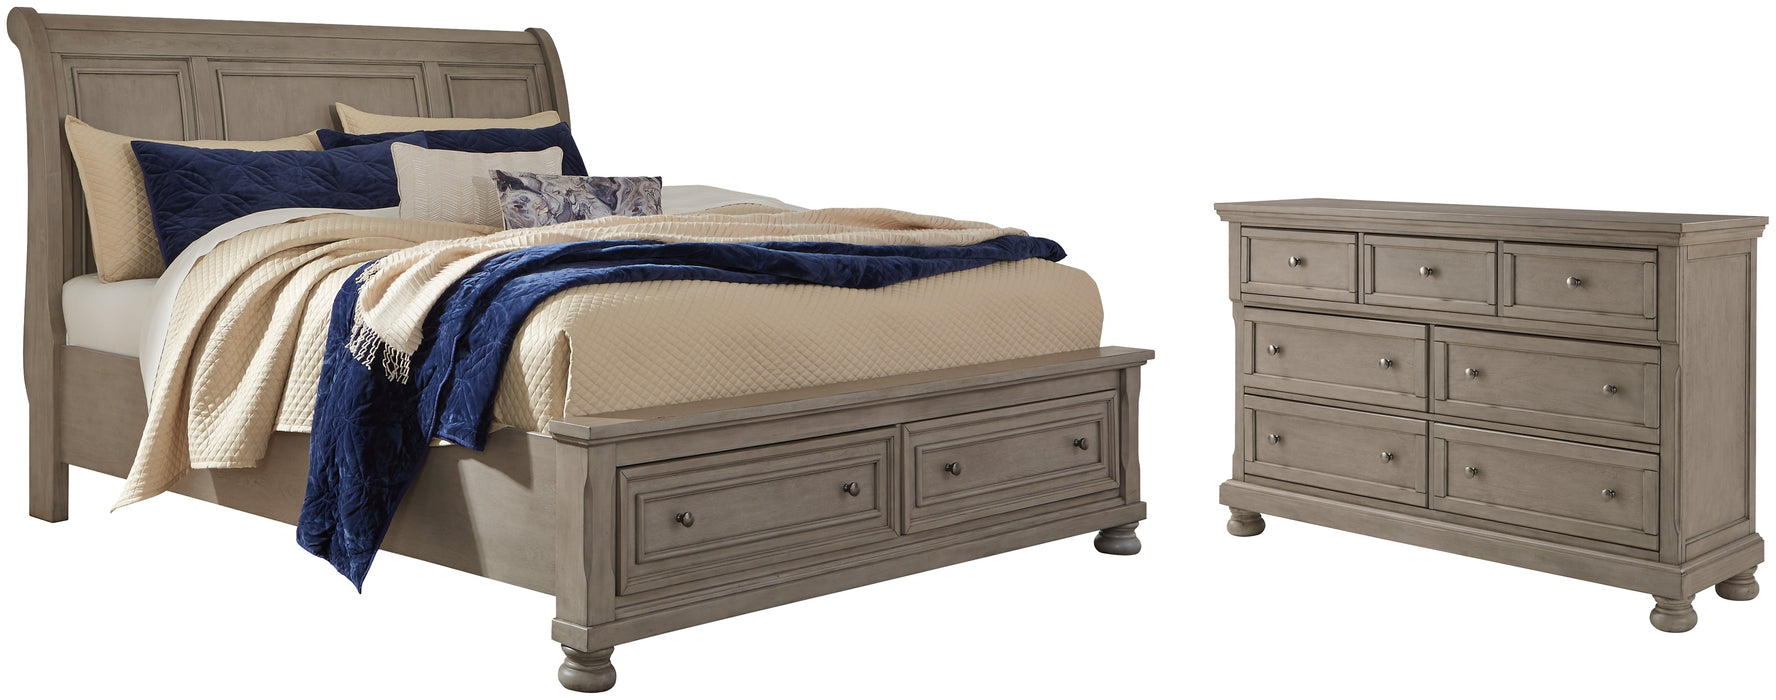 Lettner California King Sleigh Bed with Dresser JR Furniture Storefurniture, home furniture, home decor